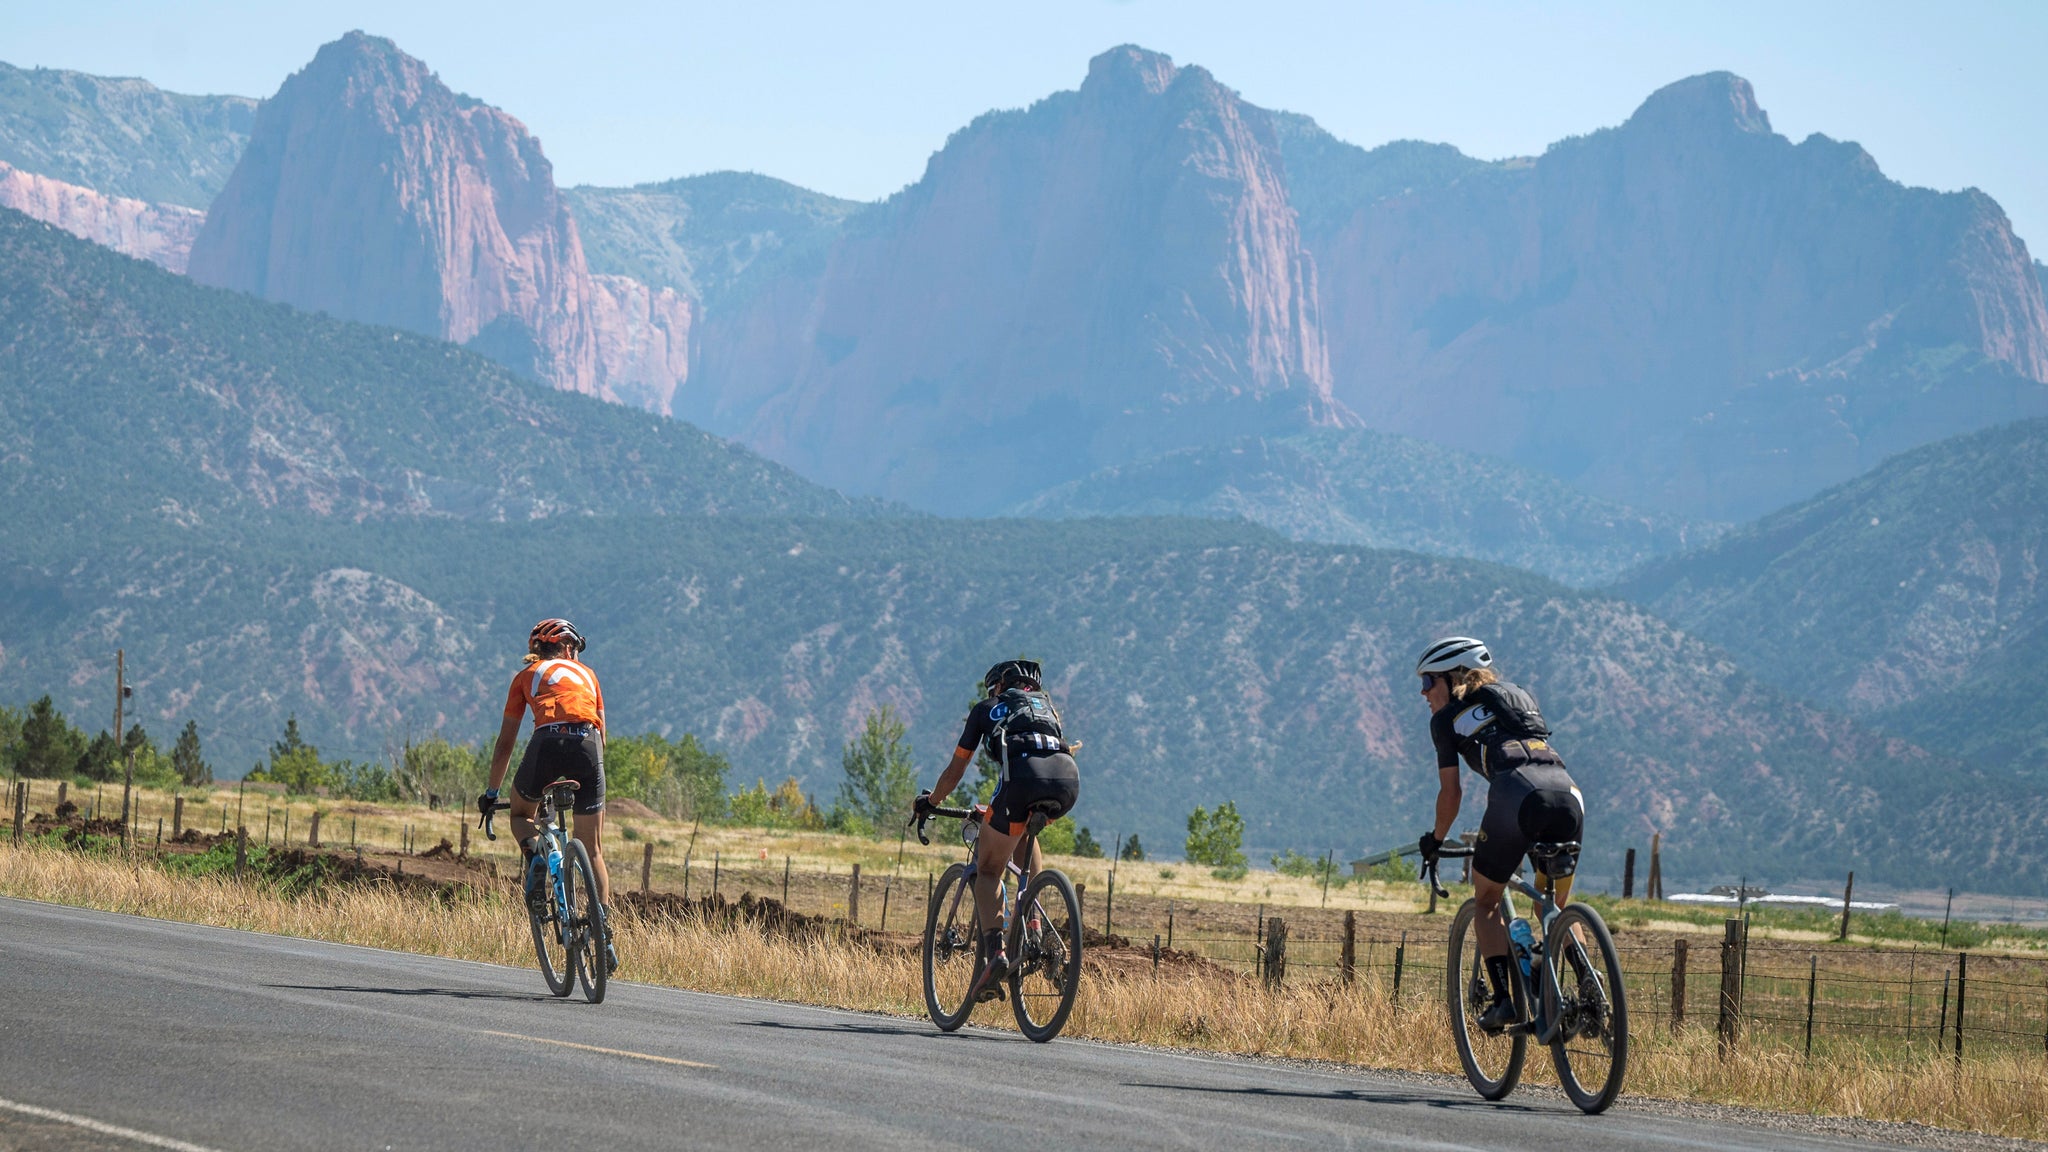 kolob canyon in the bkg